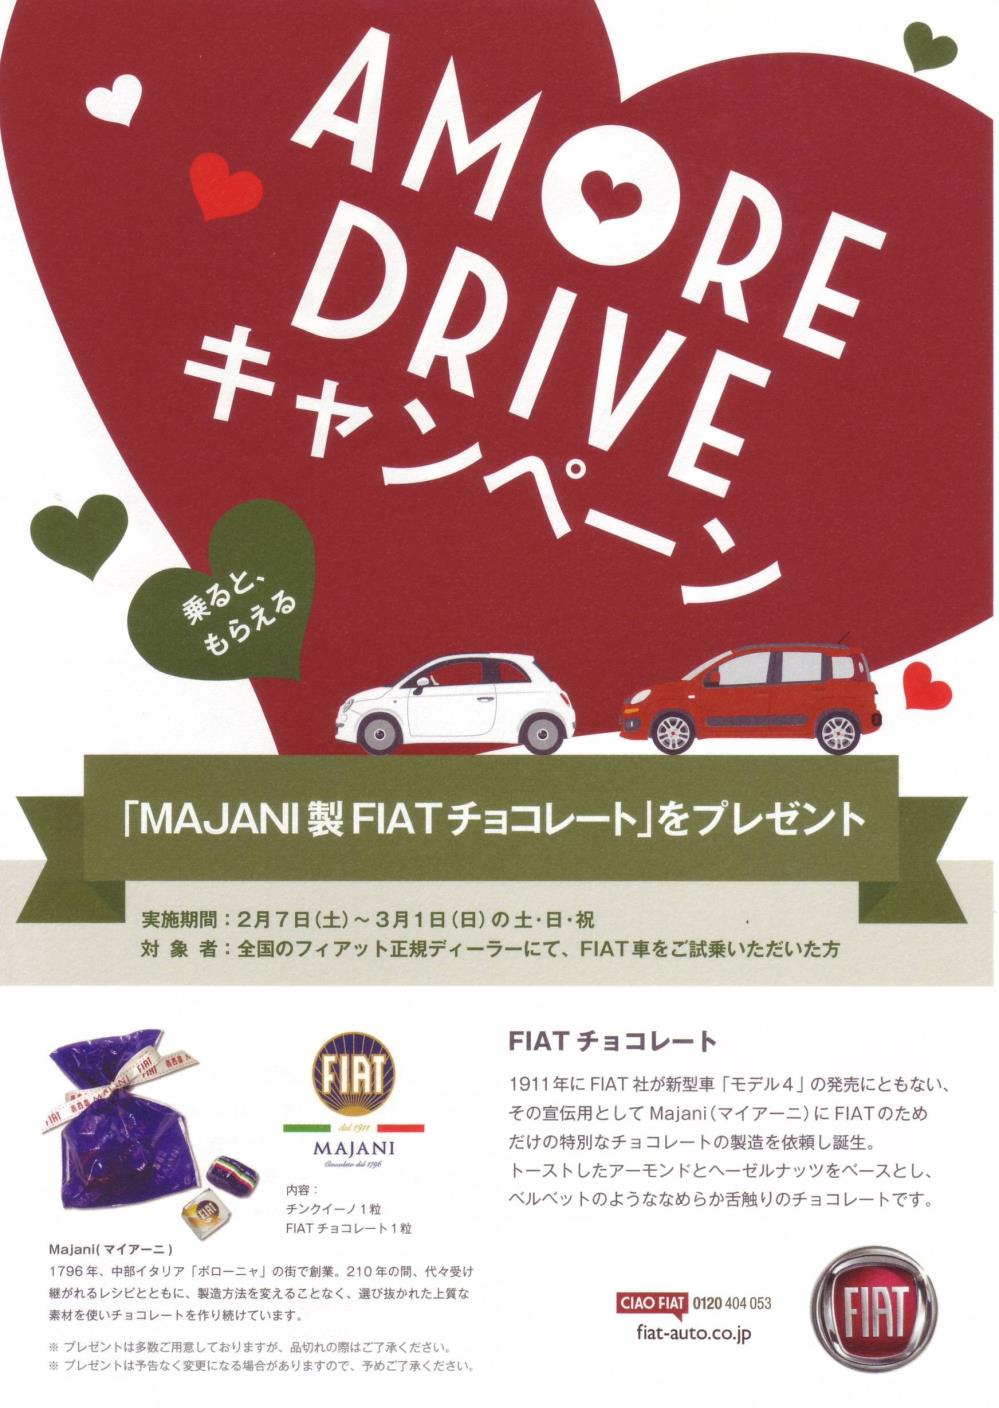 AMORE DRIVE キャンペーン.png